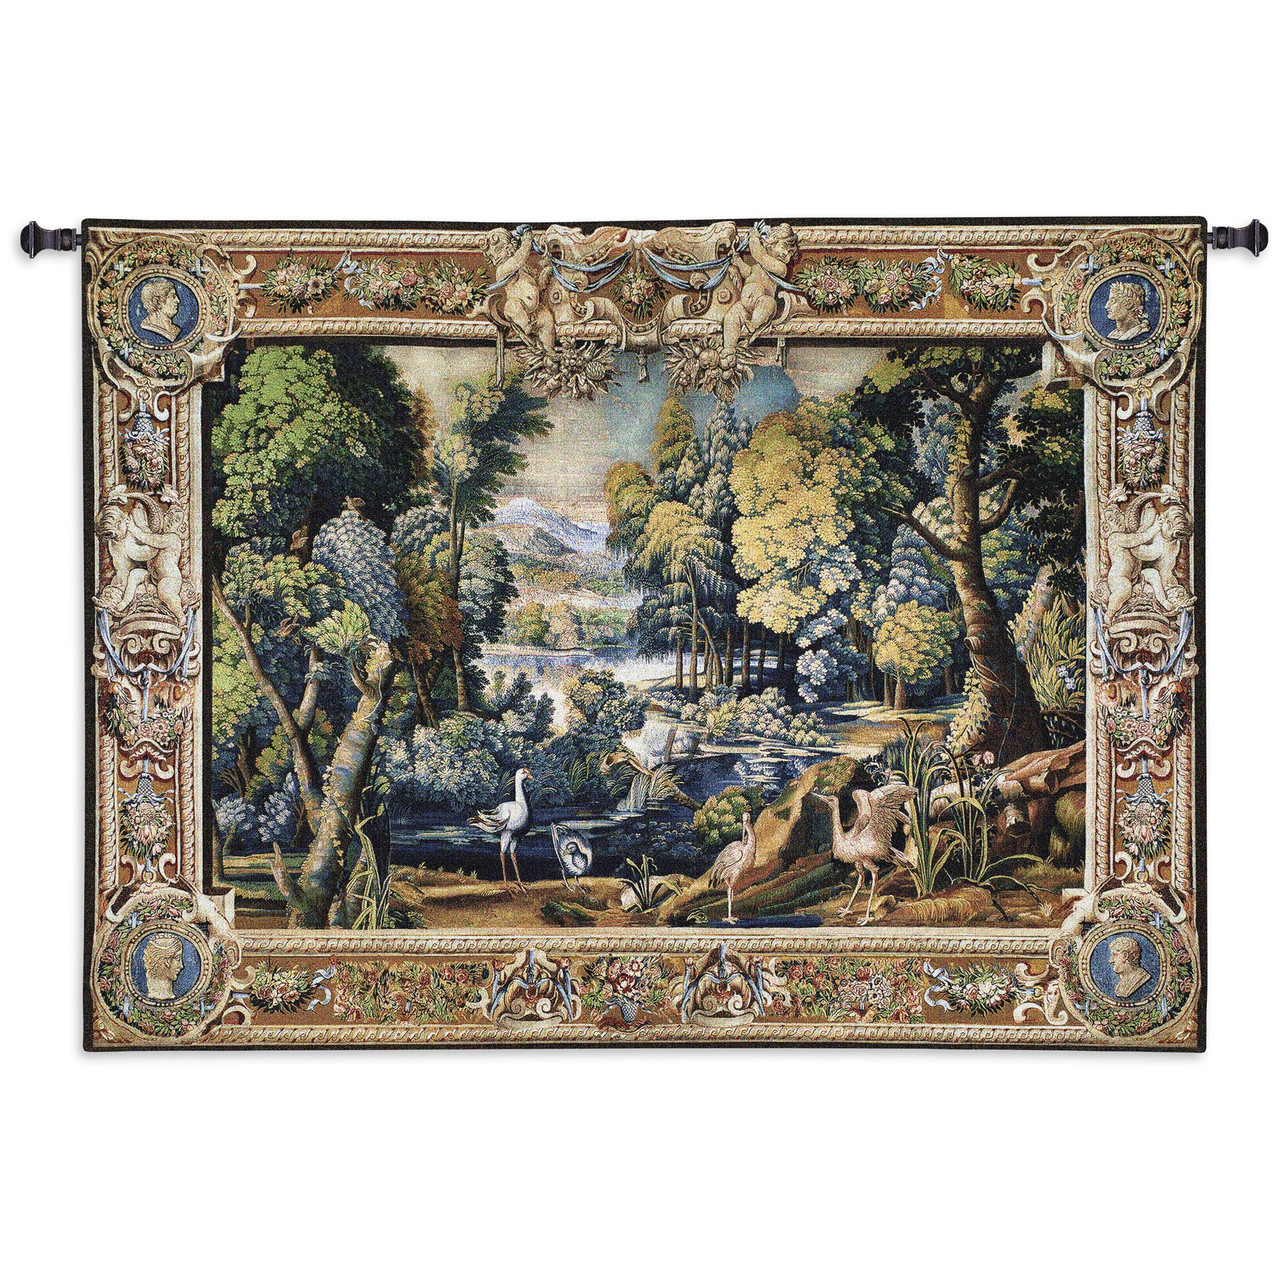 15th Century Landscape Wool and Cotton Woven Tapestry Wall Art Hanging  Abundant Medieval Forest with Animals 100% Cotton USA Size 71x53